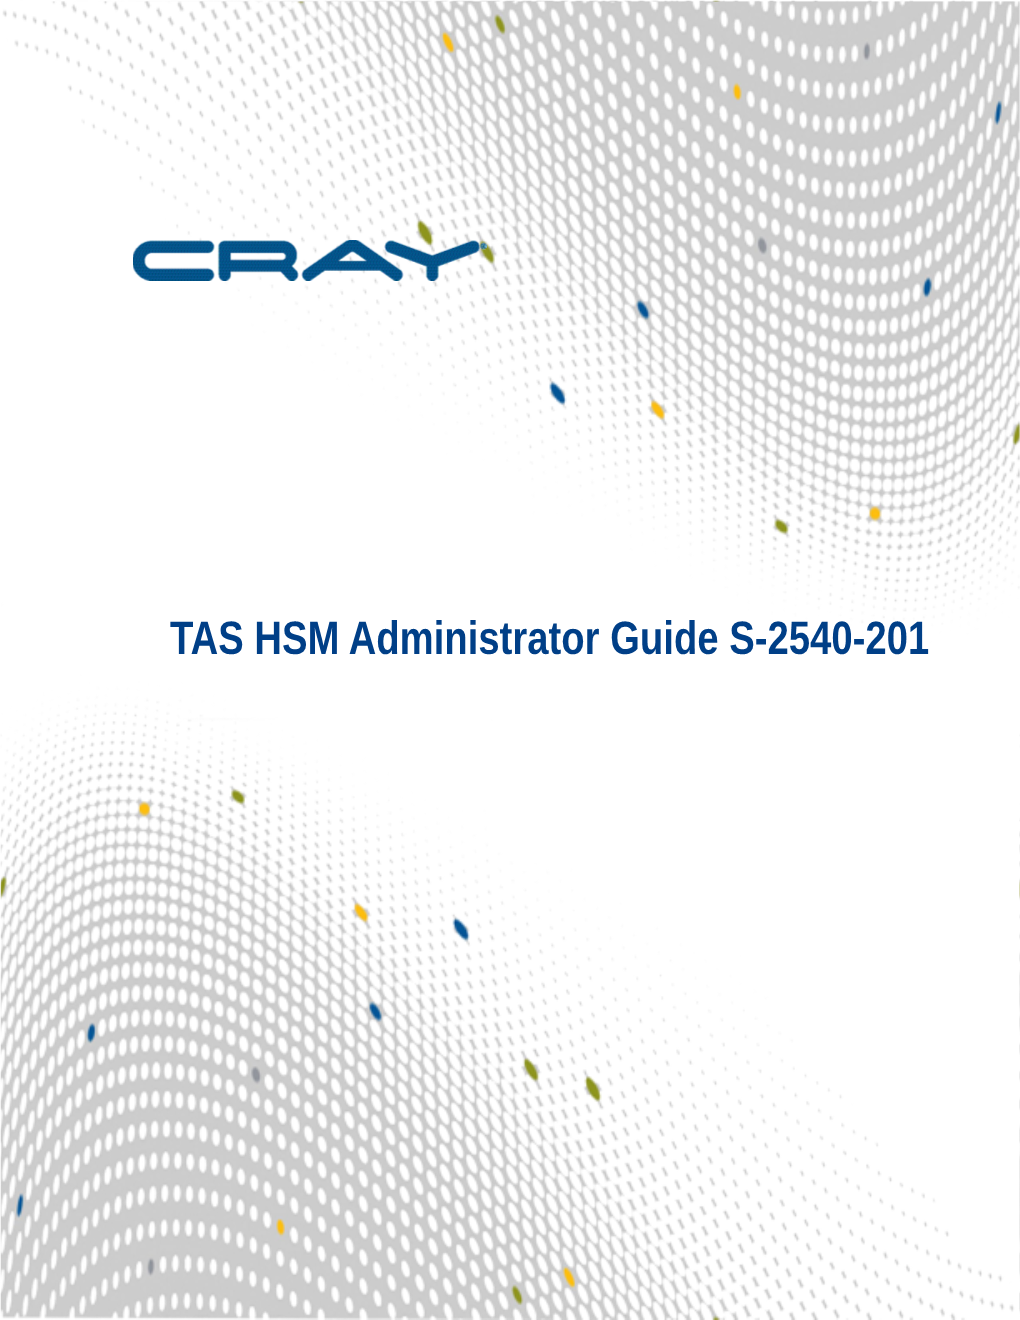 TAS HSM Administrator Guide S-2540-201 Contents